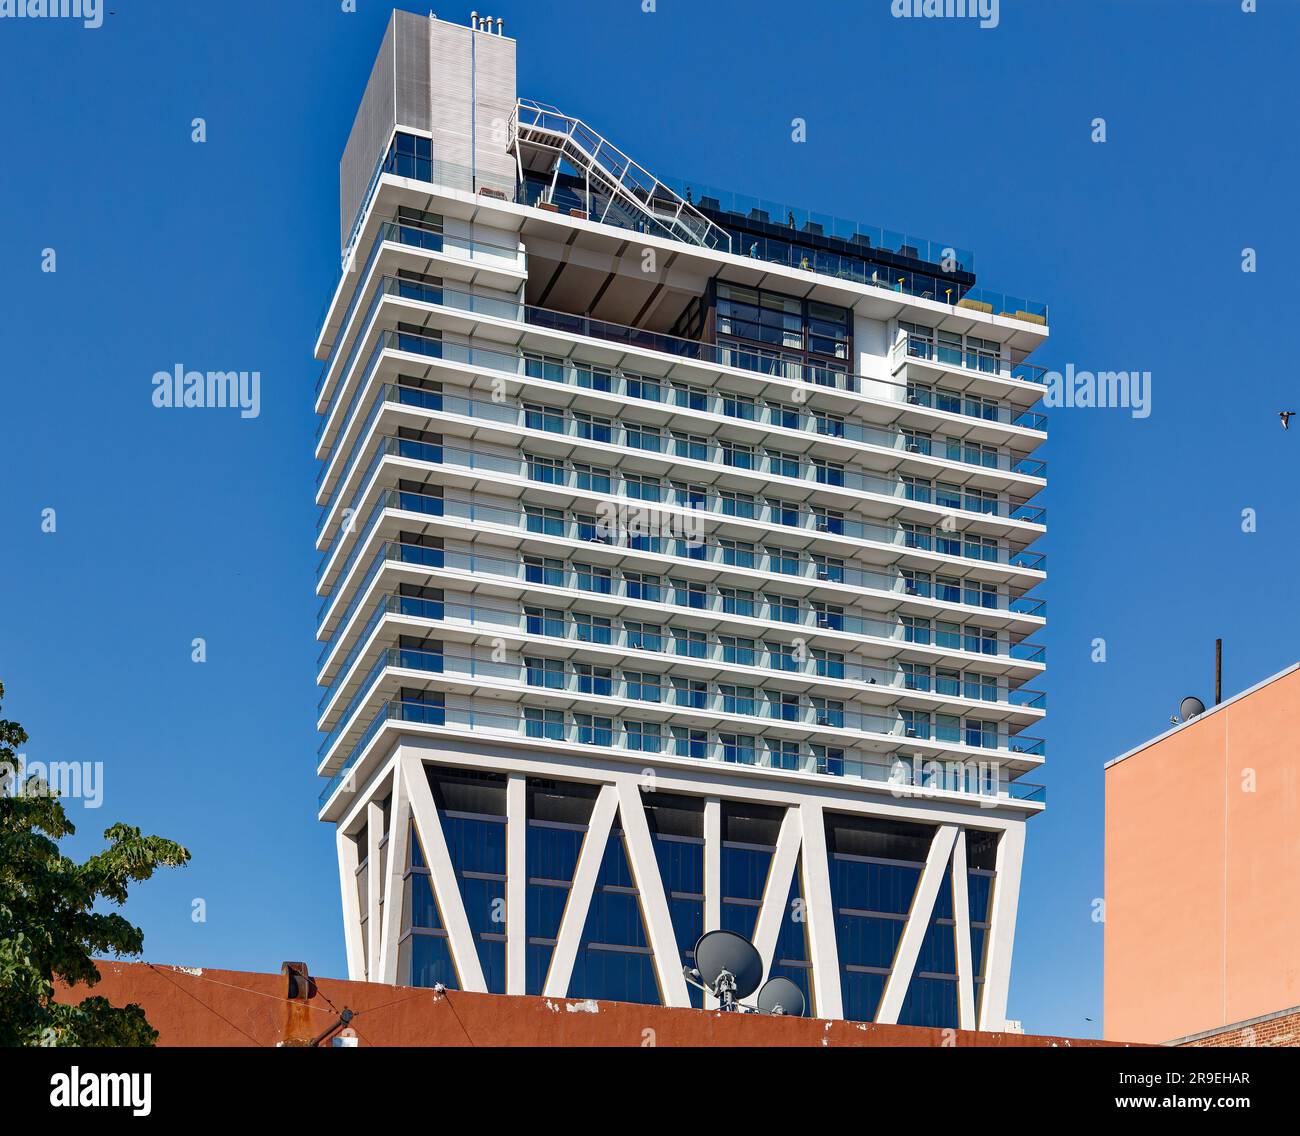 The William Vale hotel rises over truss-enclosed office floors, which rise above a two-story public, retail, and event venue podium. Stock Photo